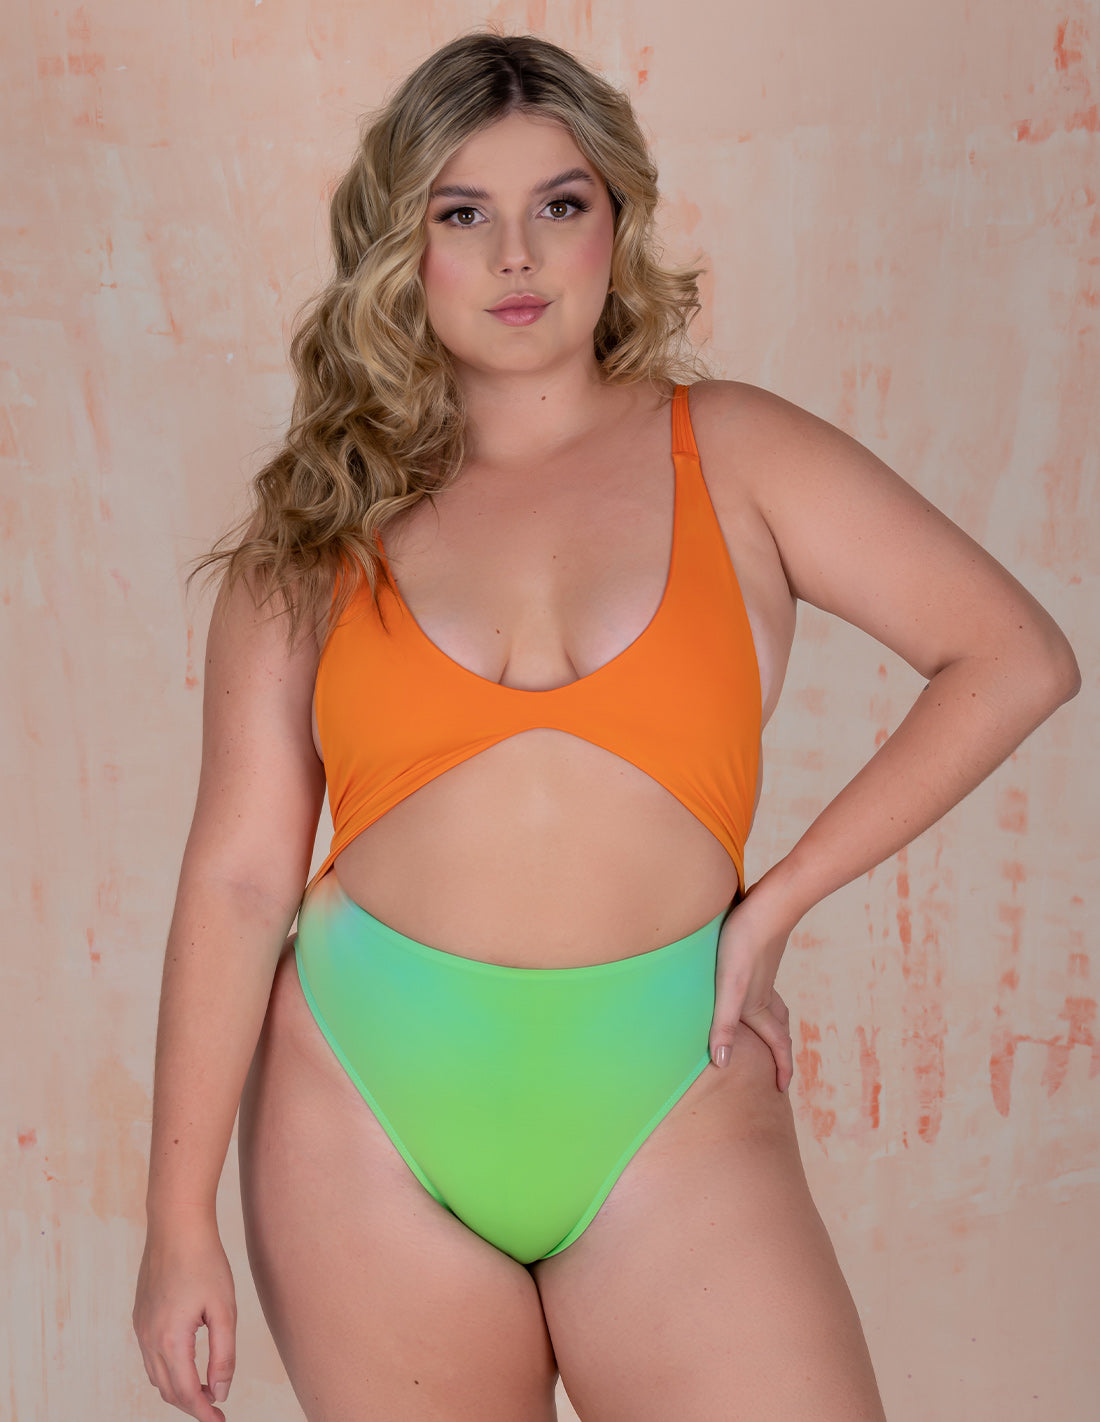 Mirror One-Piece Orange + Green. Hand-Dyed One-Piece Swimsuit With Hand Woven Macramé In Orange + Green. Entreaguas